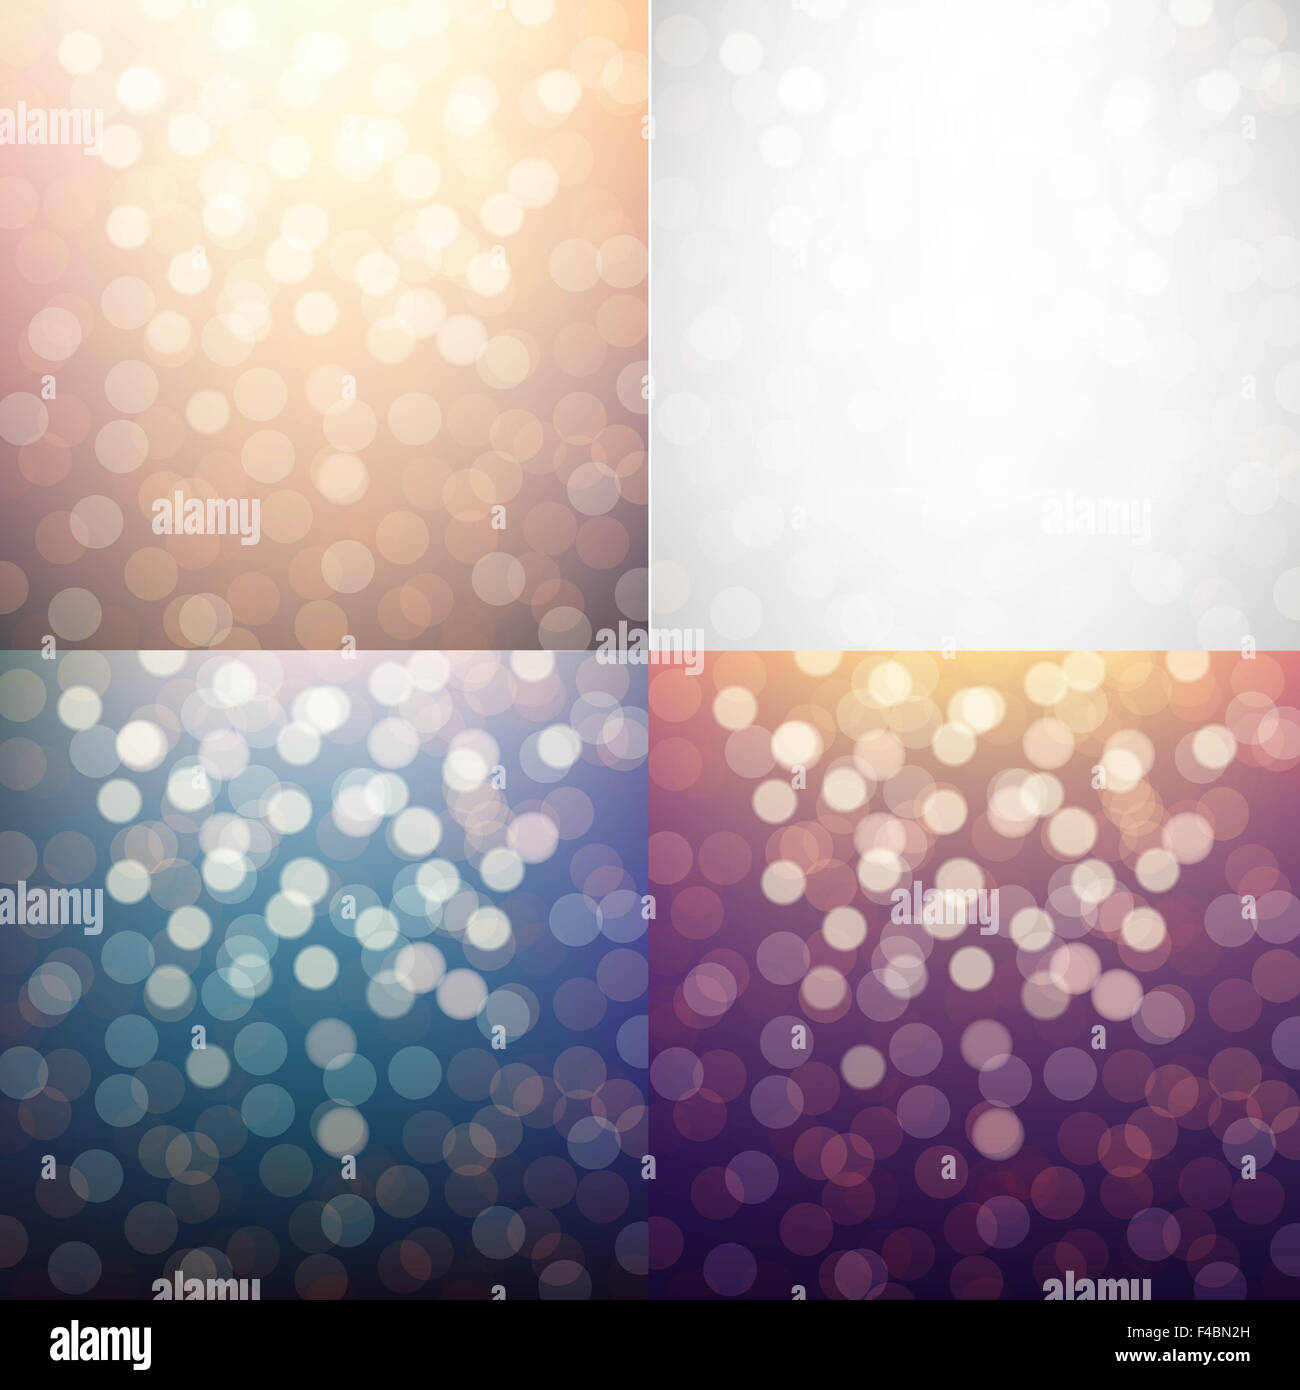 Blurred Backgrounds Set Stock Photo